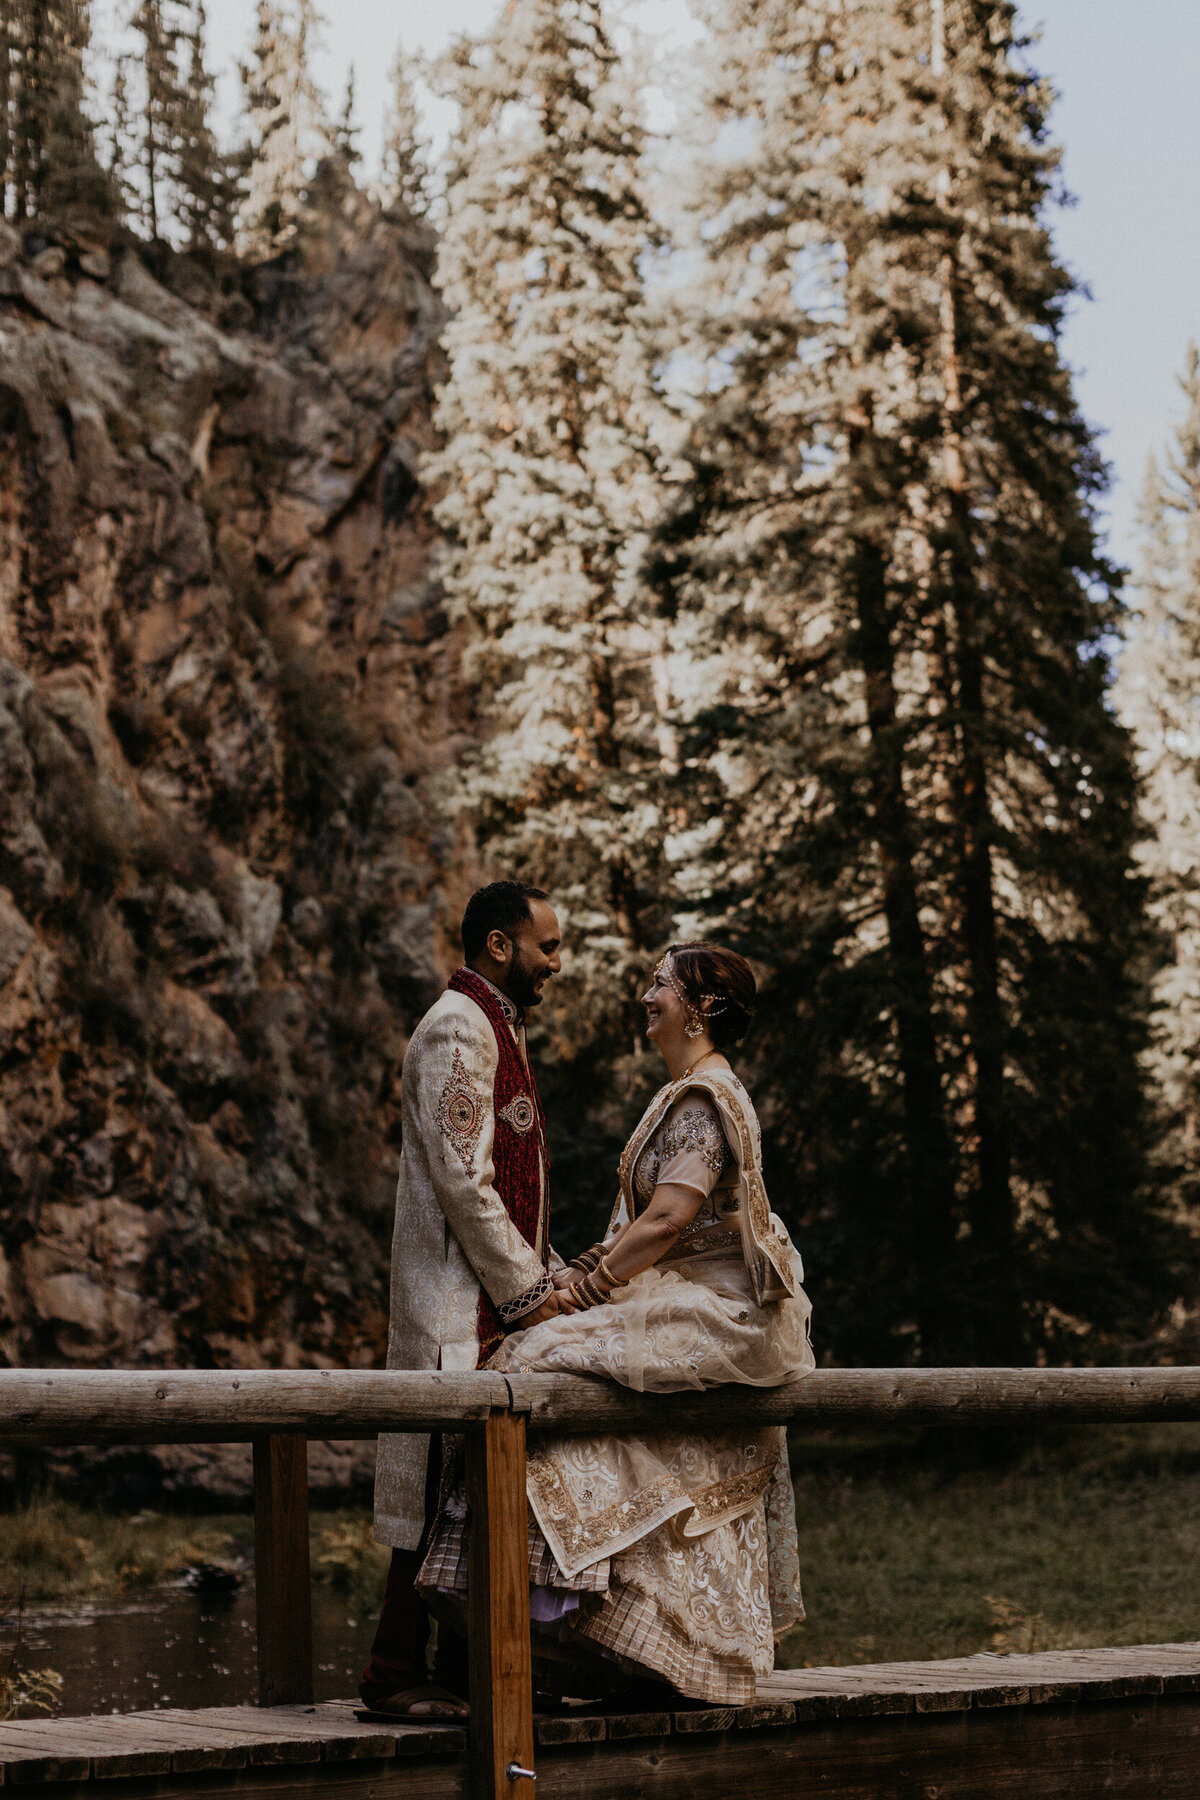 bride and groom in Indian attire on a bridge